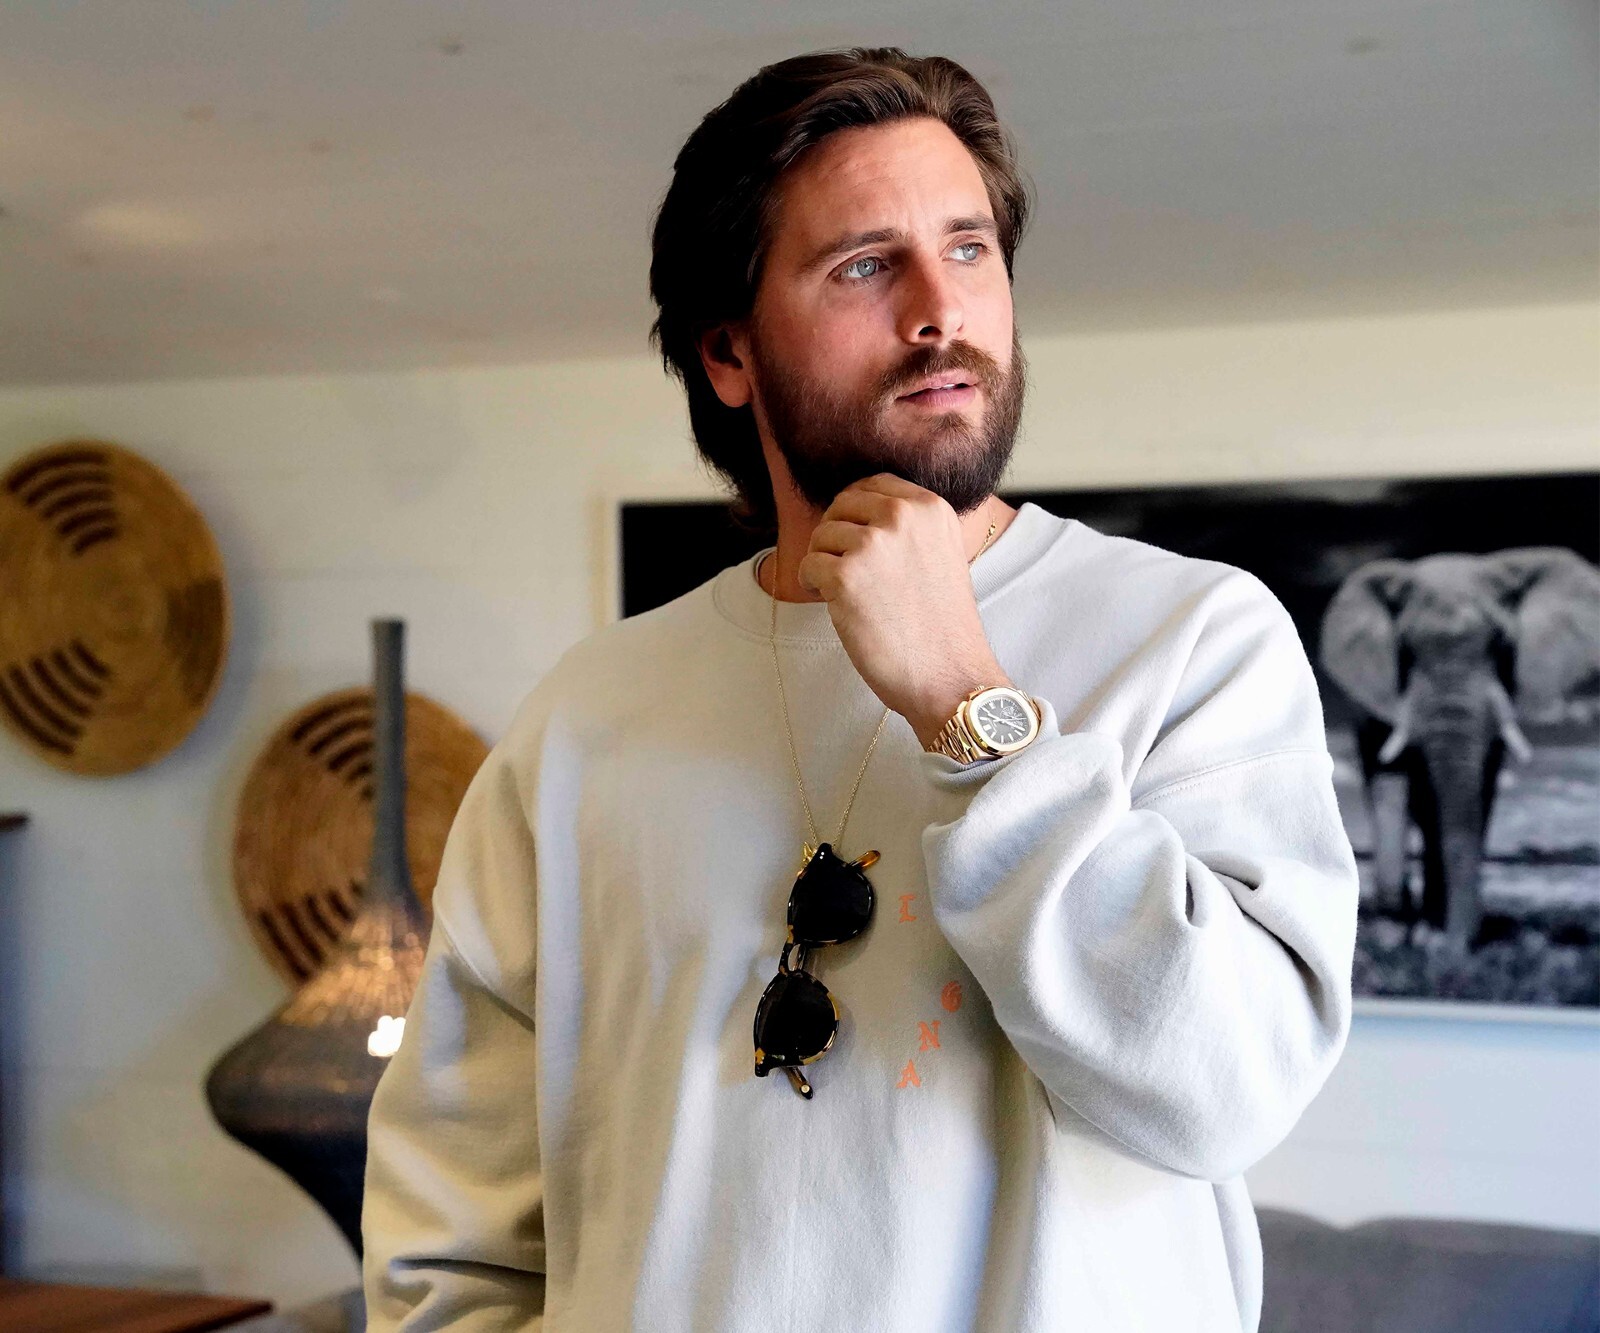 Did the breakup with his girlfriend lead Scott Disick to rehab? Film